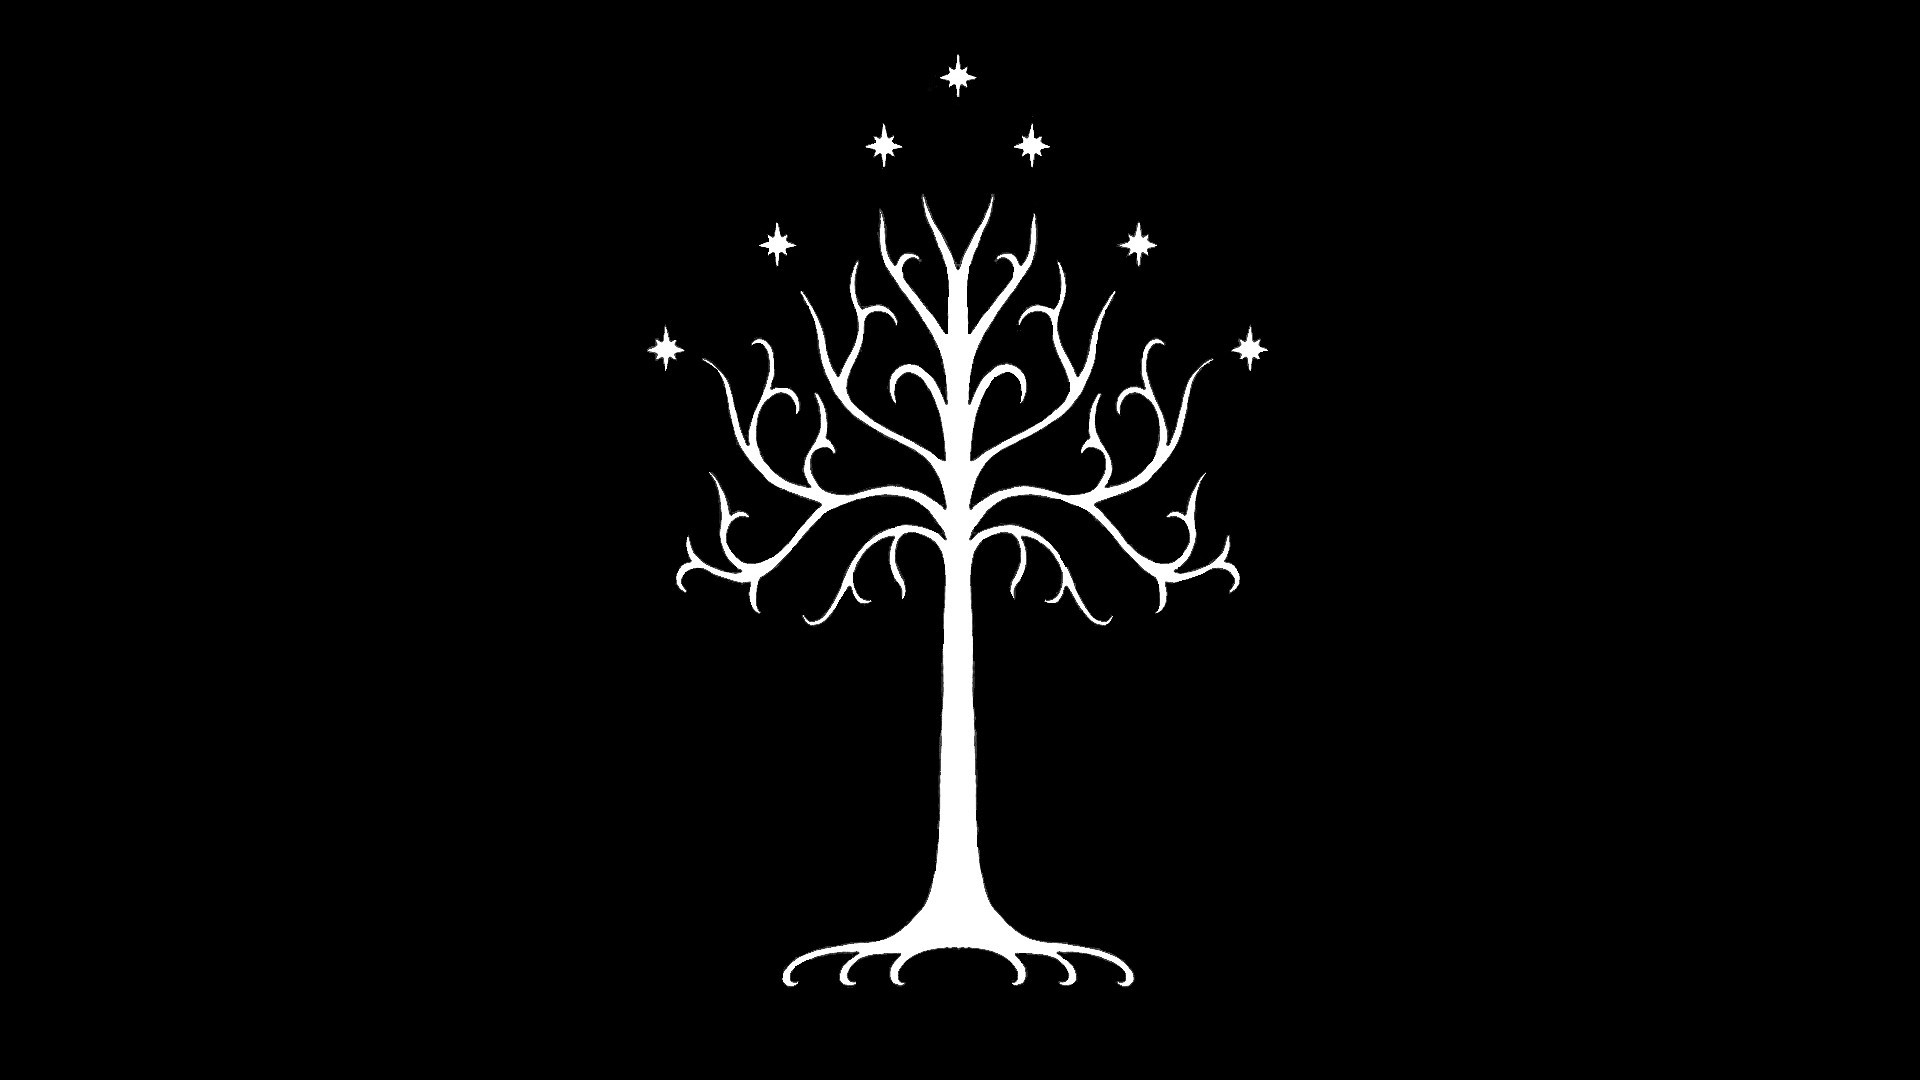 Movies The Lord Of The Rings Minimalism Simple Background Gondor Trees Stars 1920x1080